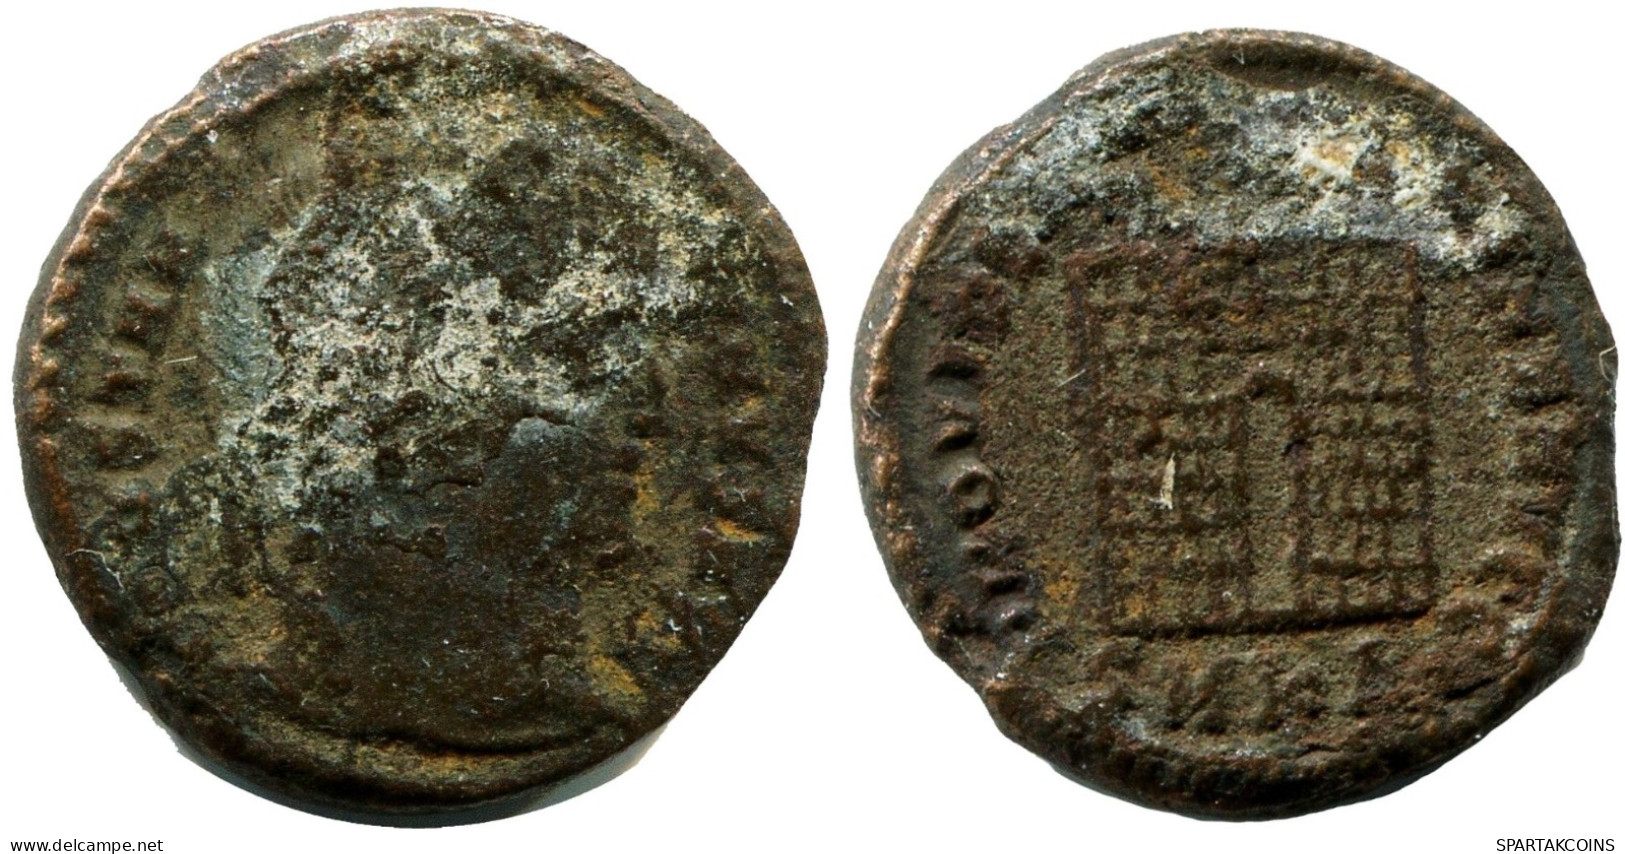 CONSTANTINE I MINTED IN CYZICUS FOUND IN IHNASYAH HOARD EGYPT #ANC11005.14.D.A - The Christian Empire (307 AD To 363 AD)